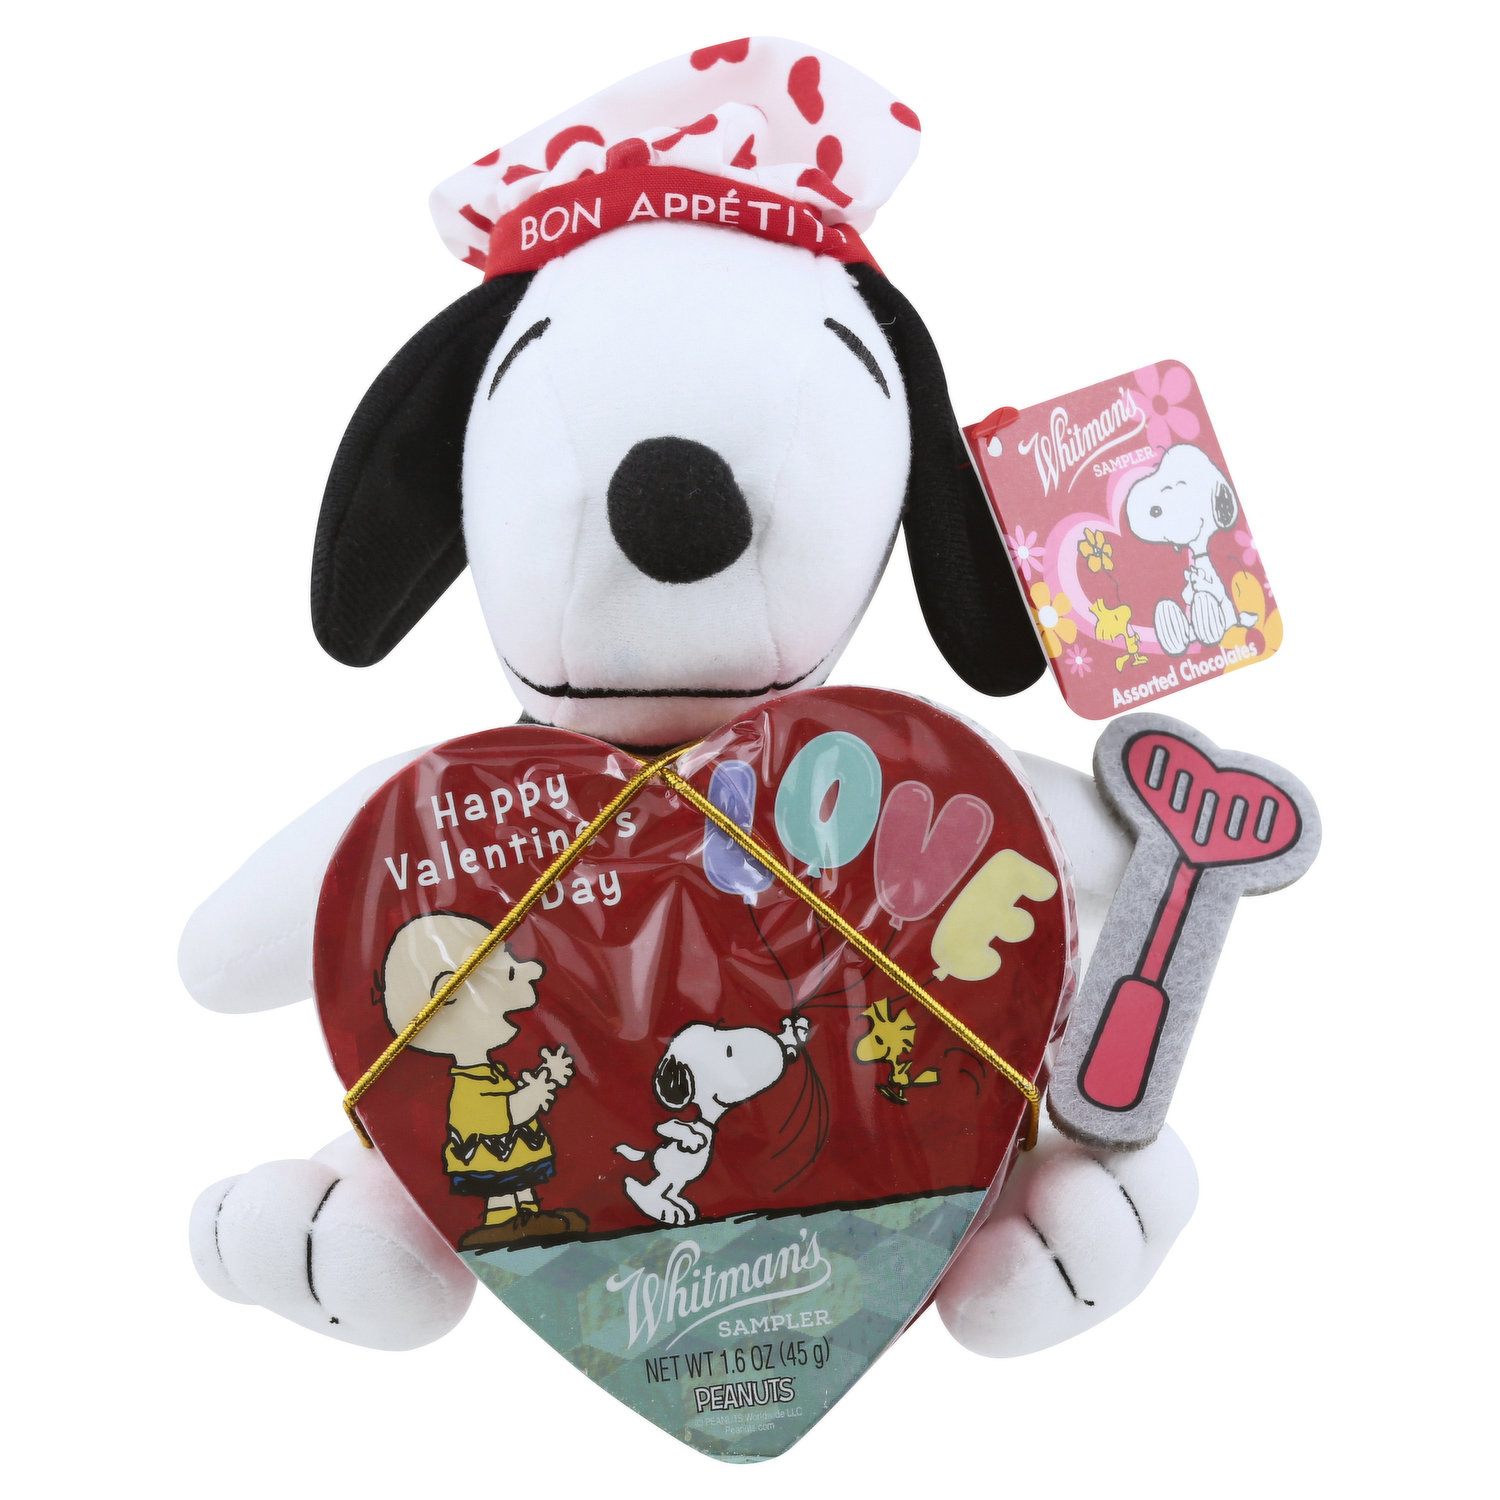 Whitmans Peanuts Snoopy & Woodstock Valentines Plush Candy Holder Gift Lot  of 3